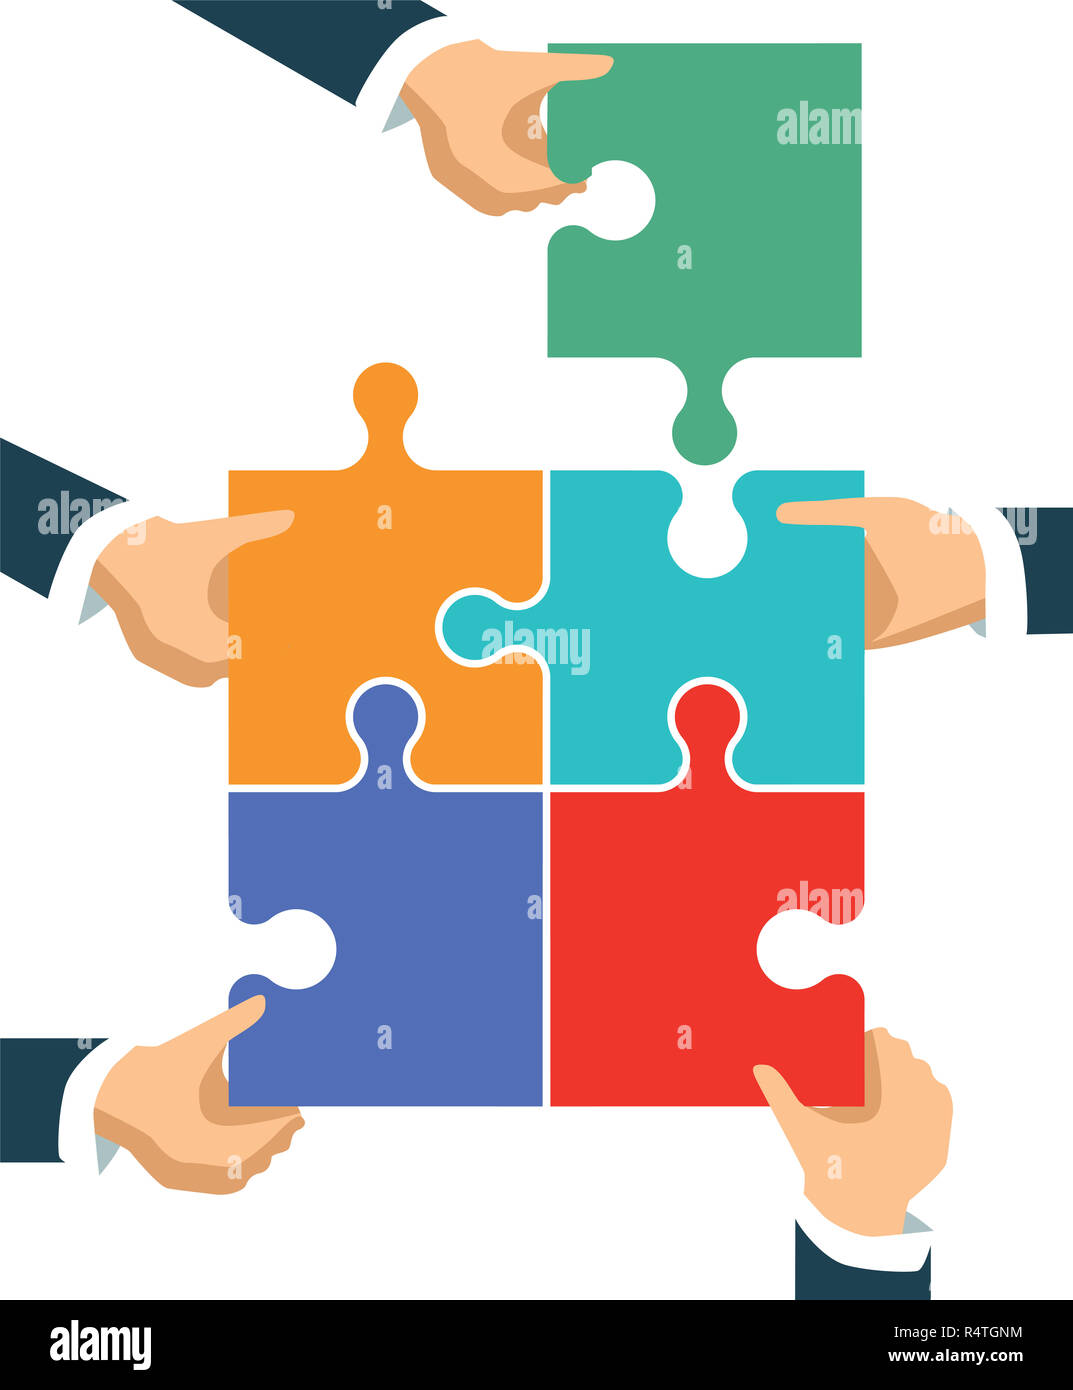 connections and cooperation in the group,illustration Stock Photo